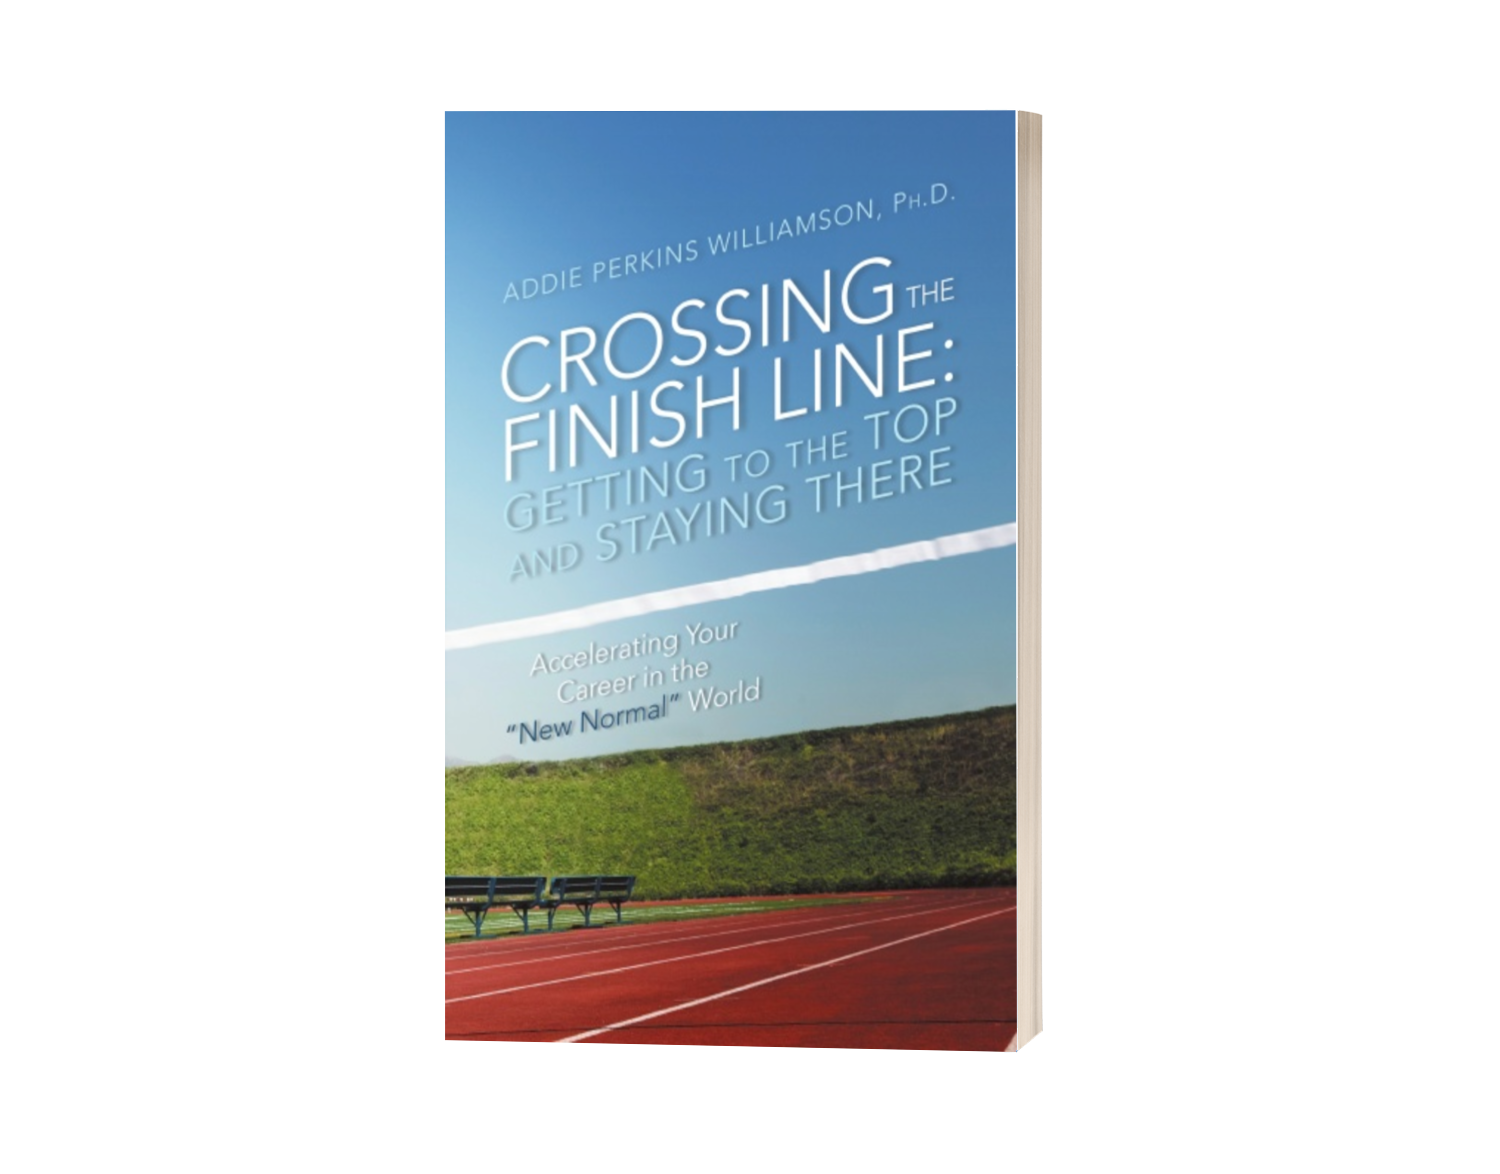 Crossing the Finish Line: Getting to the Top and Staying There